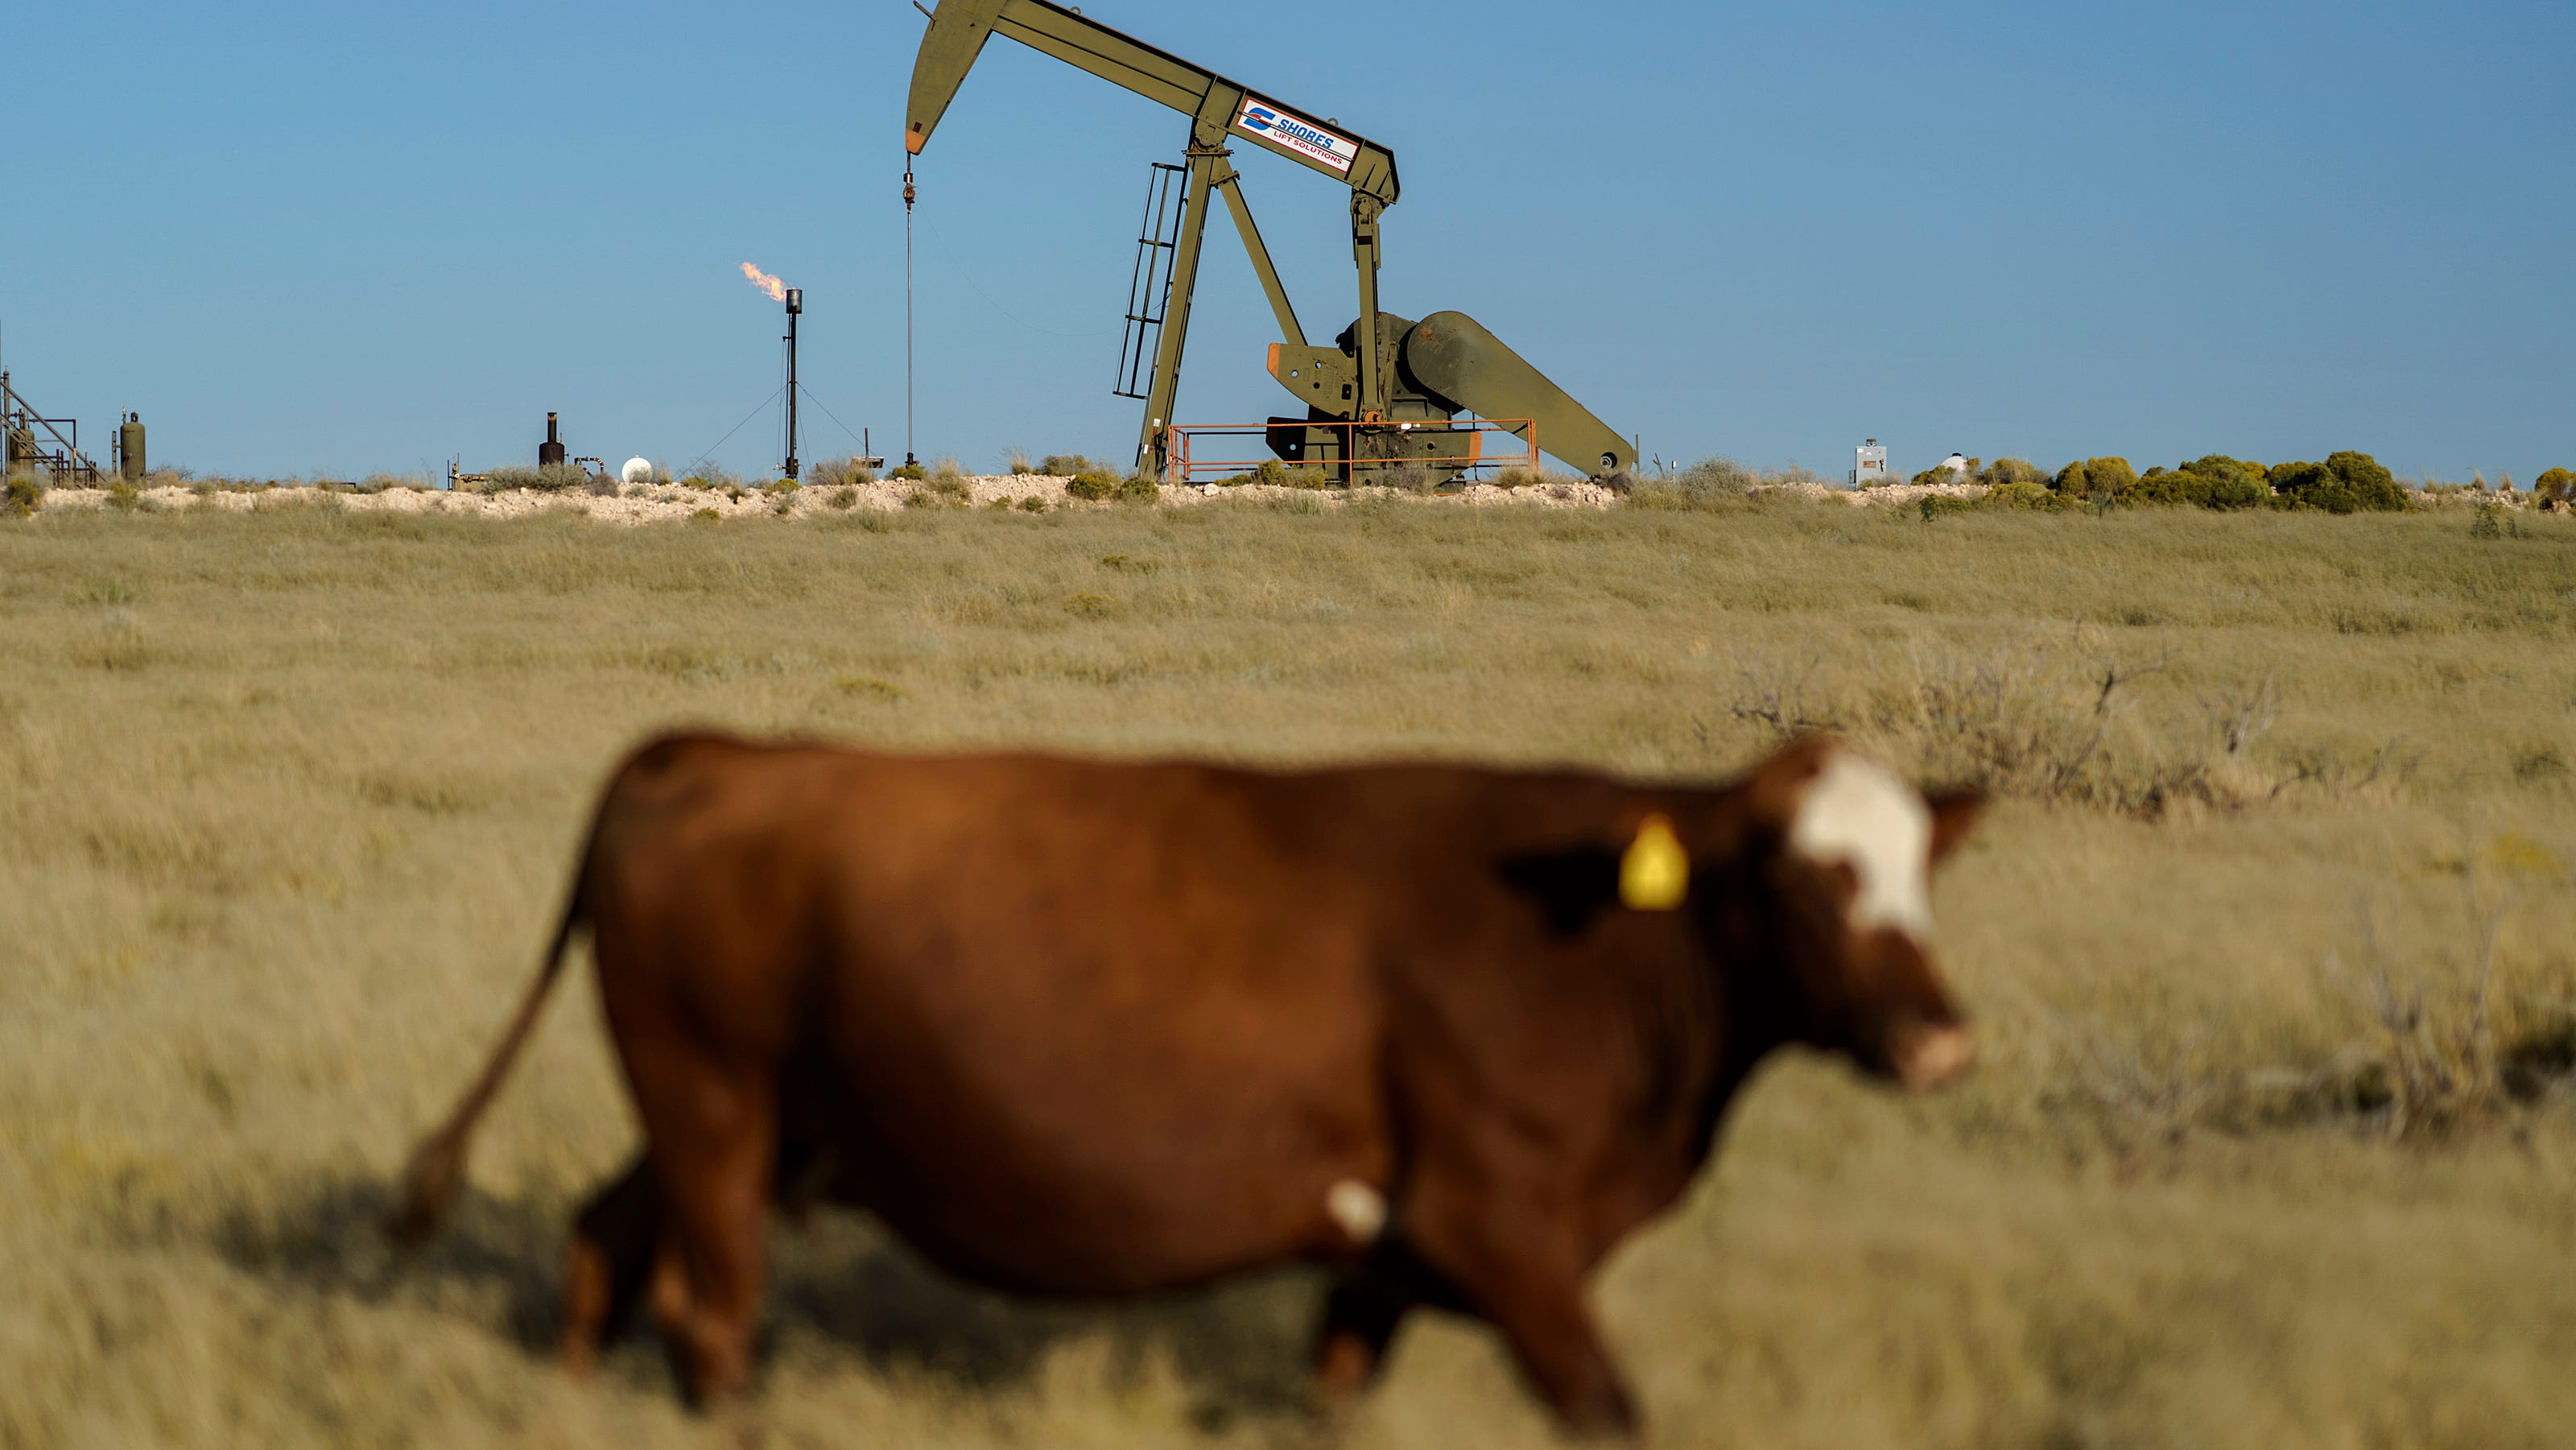 Oil and gas industry says it's reducing air pollution in Permian Basin. Can it be trusted?